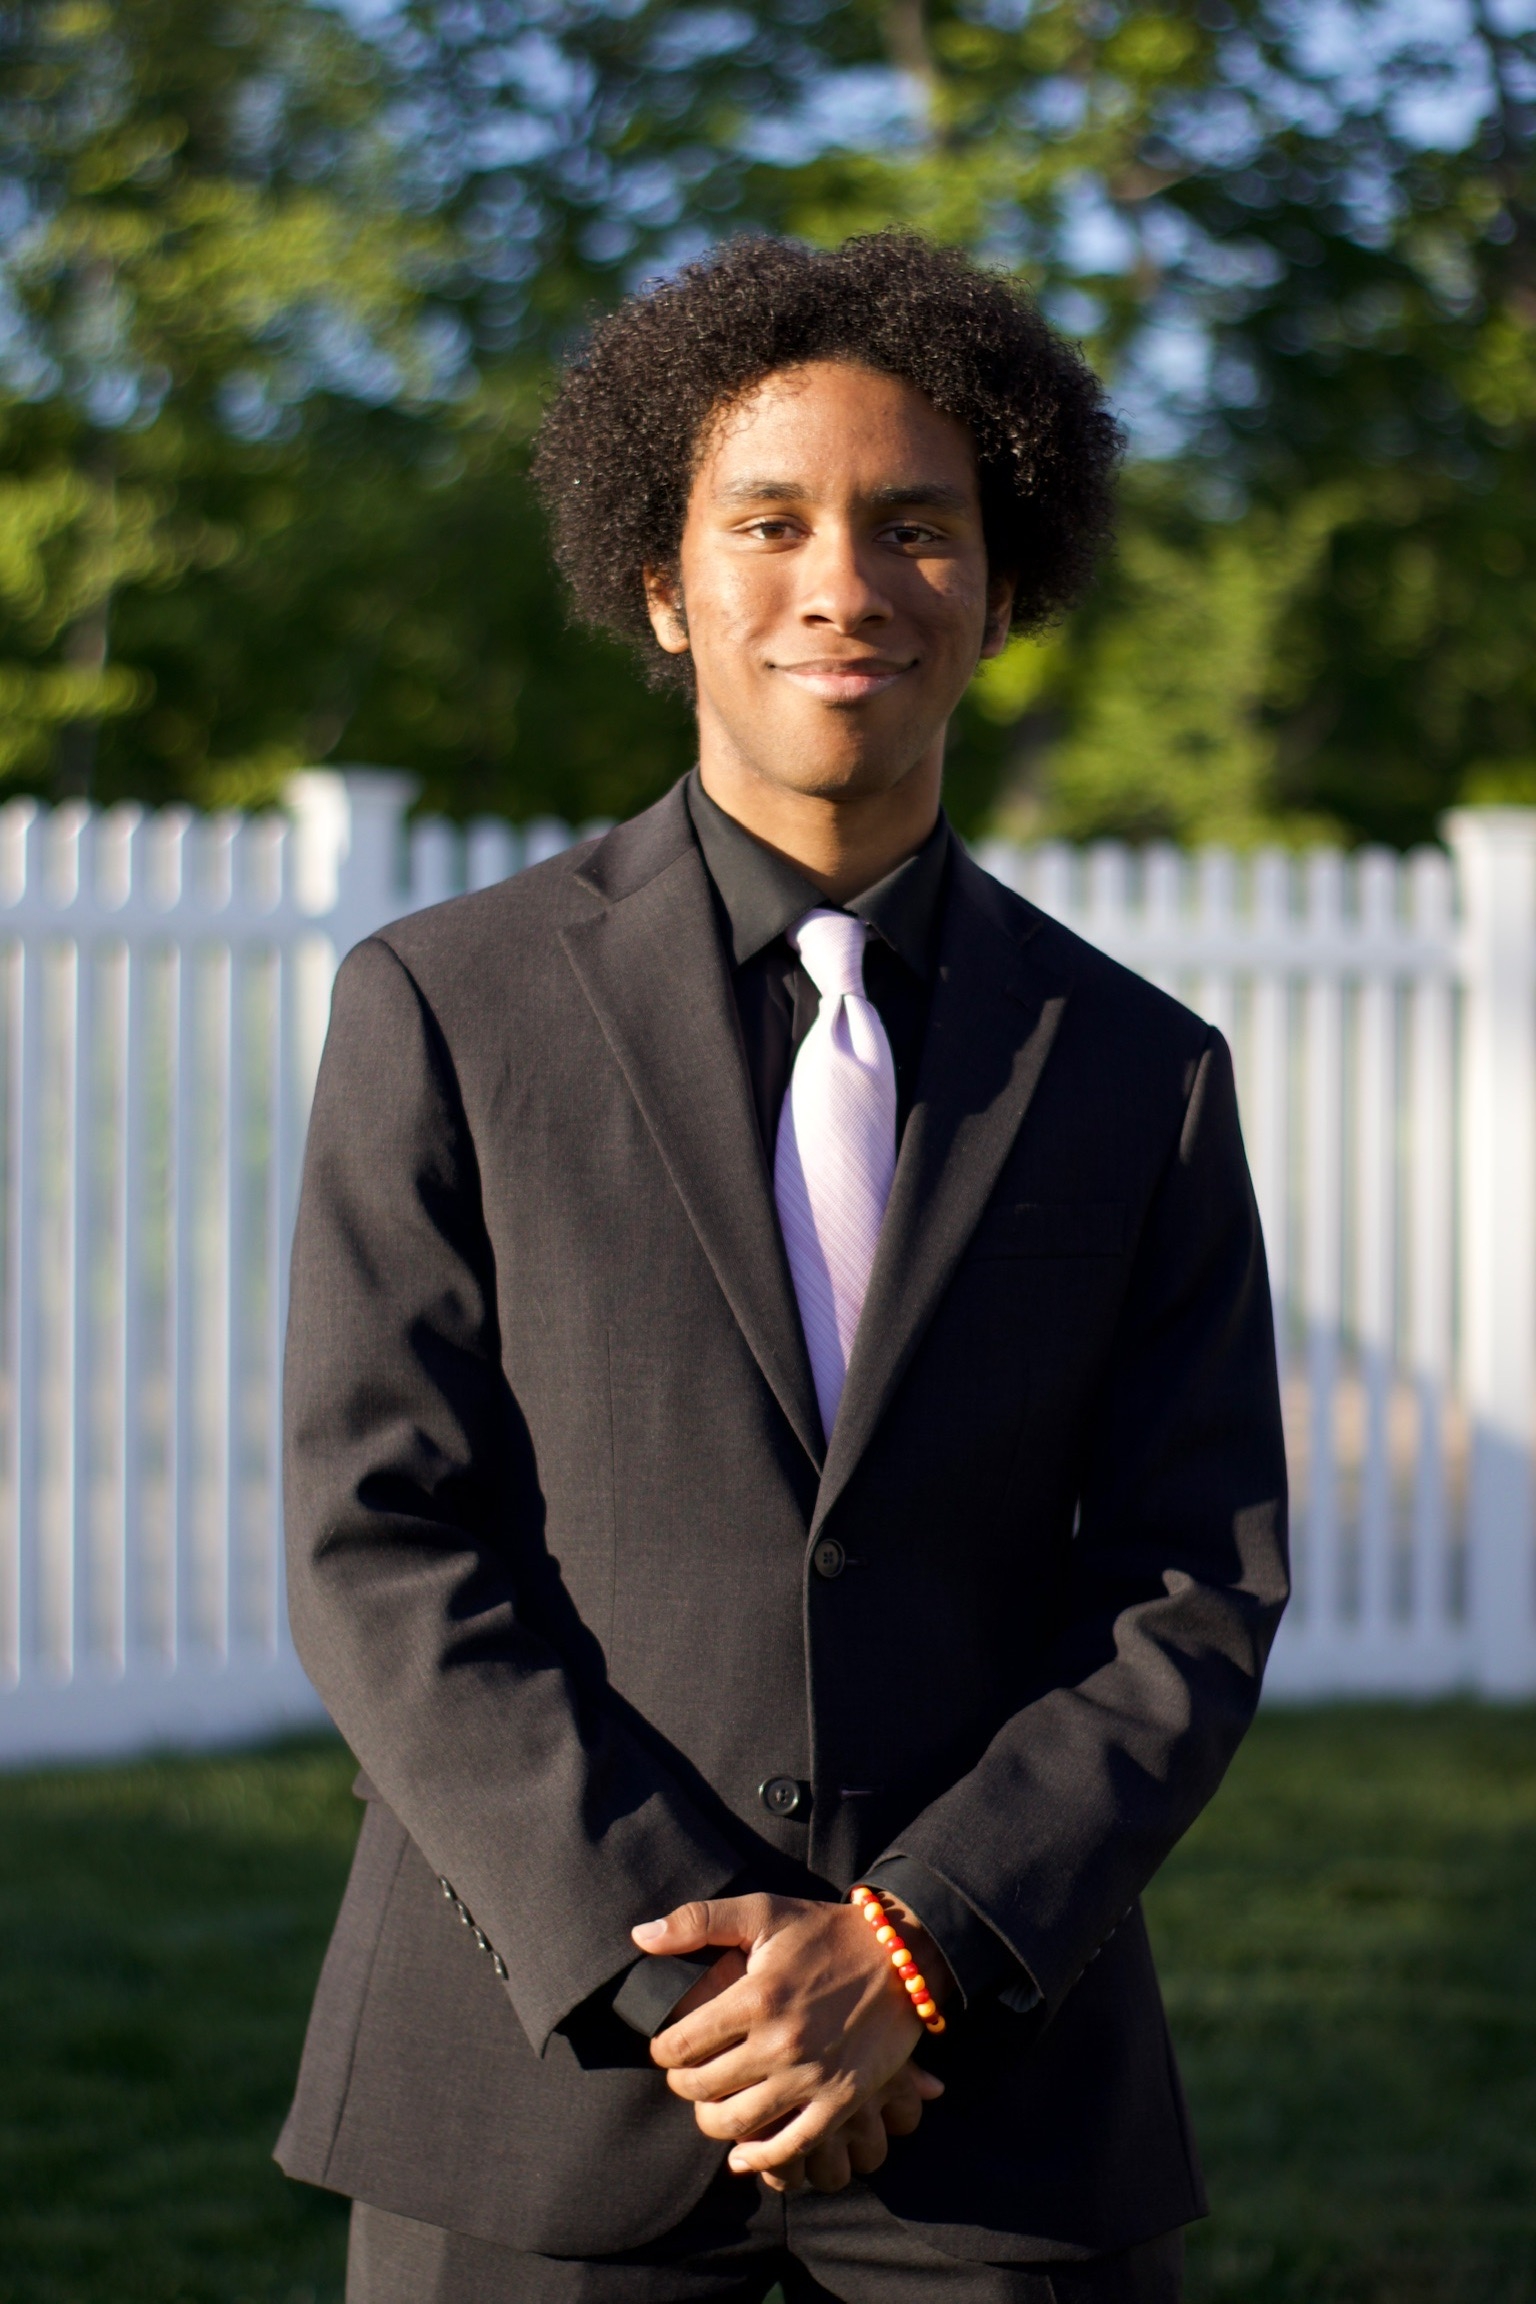 A man in a suit with a purple tie stands outside